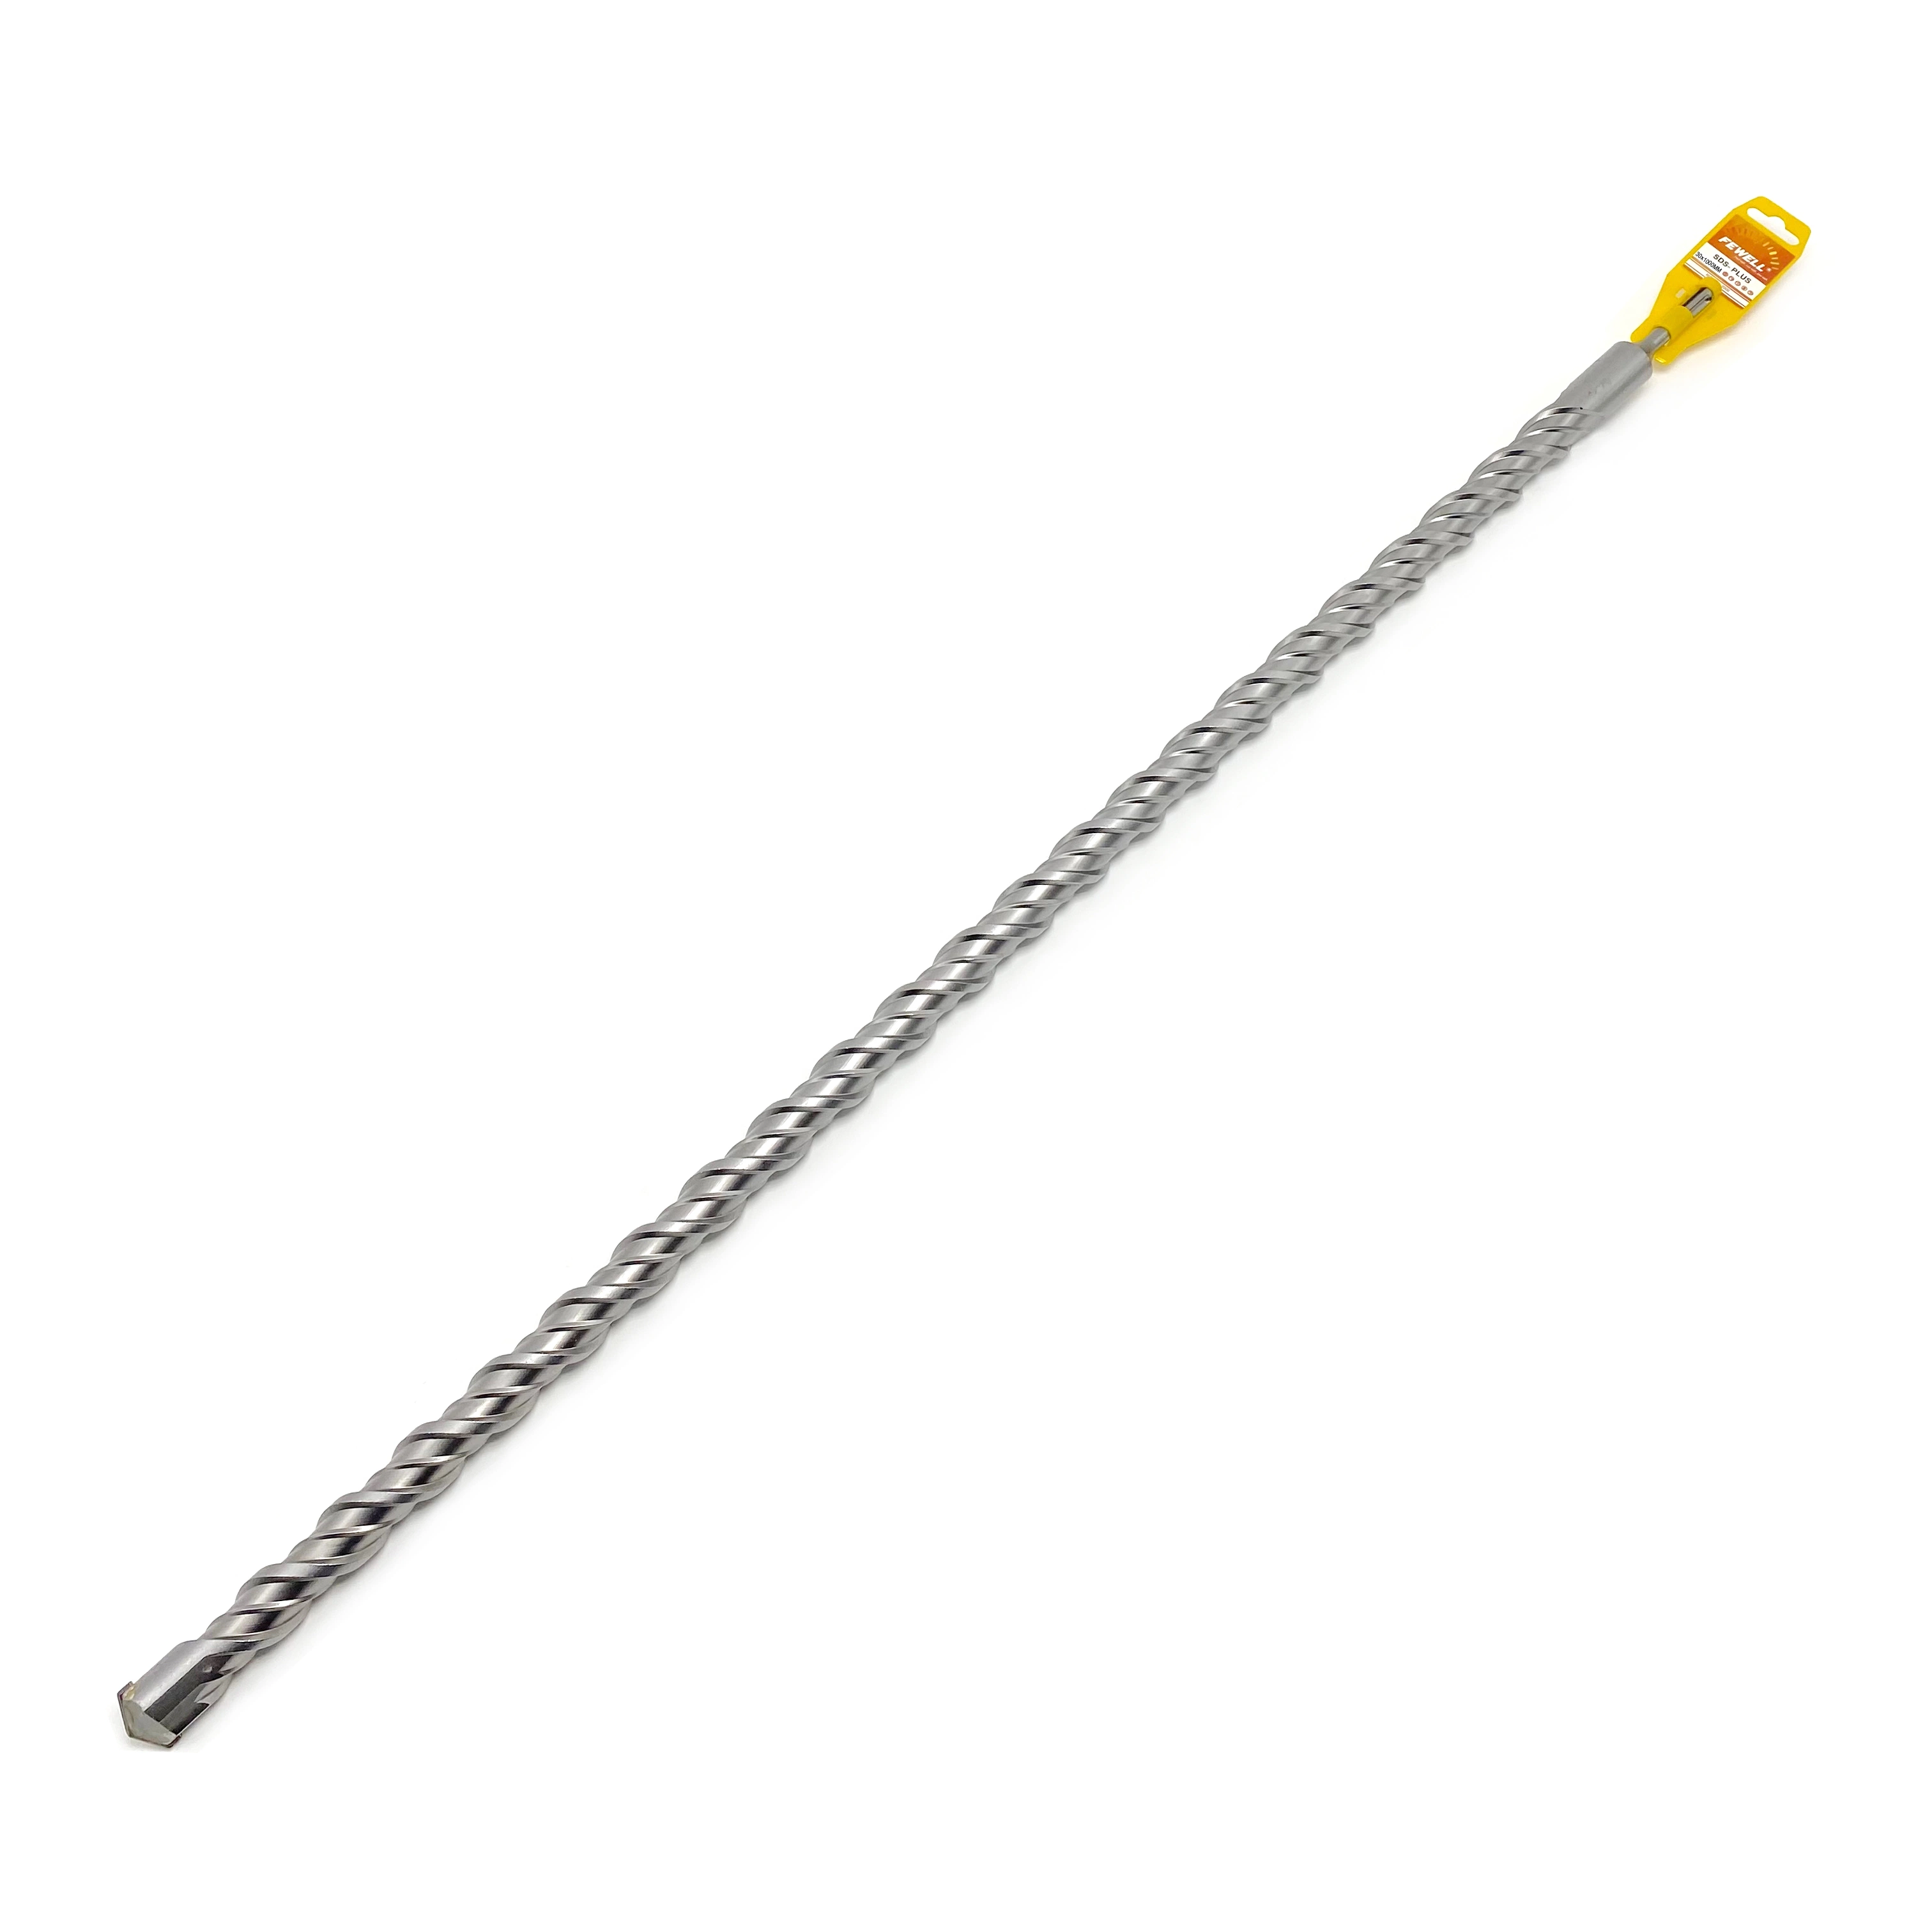 SDS Plus Carbide Single Flat Tip 30*1000 Double Flute Electric Hammer Drill Bit for Concrete Wall Masonry Hard Stone Granite